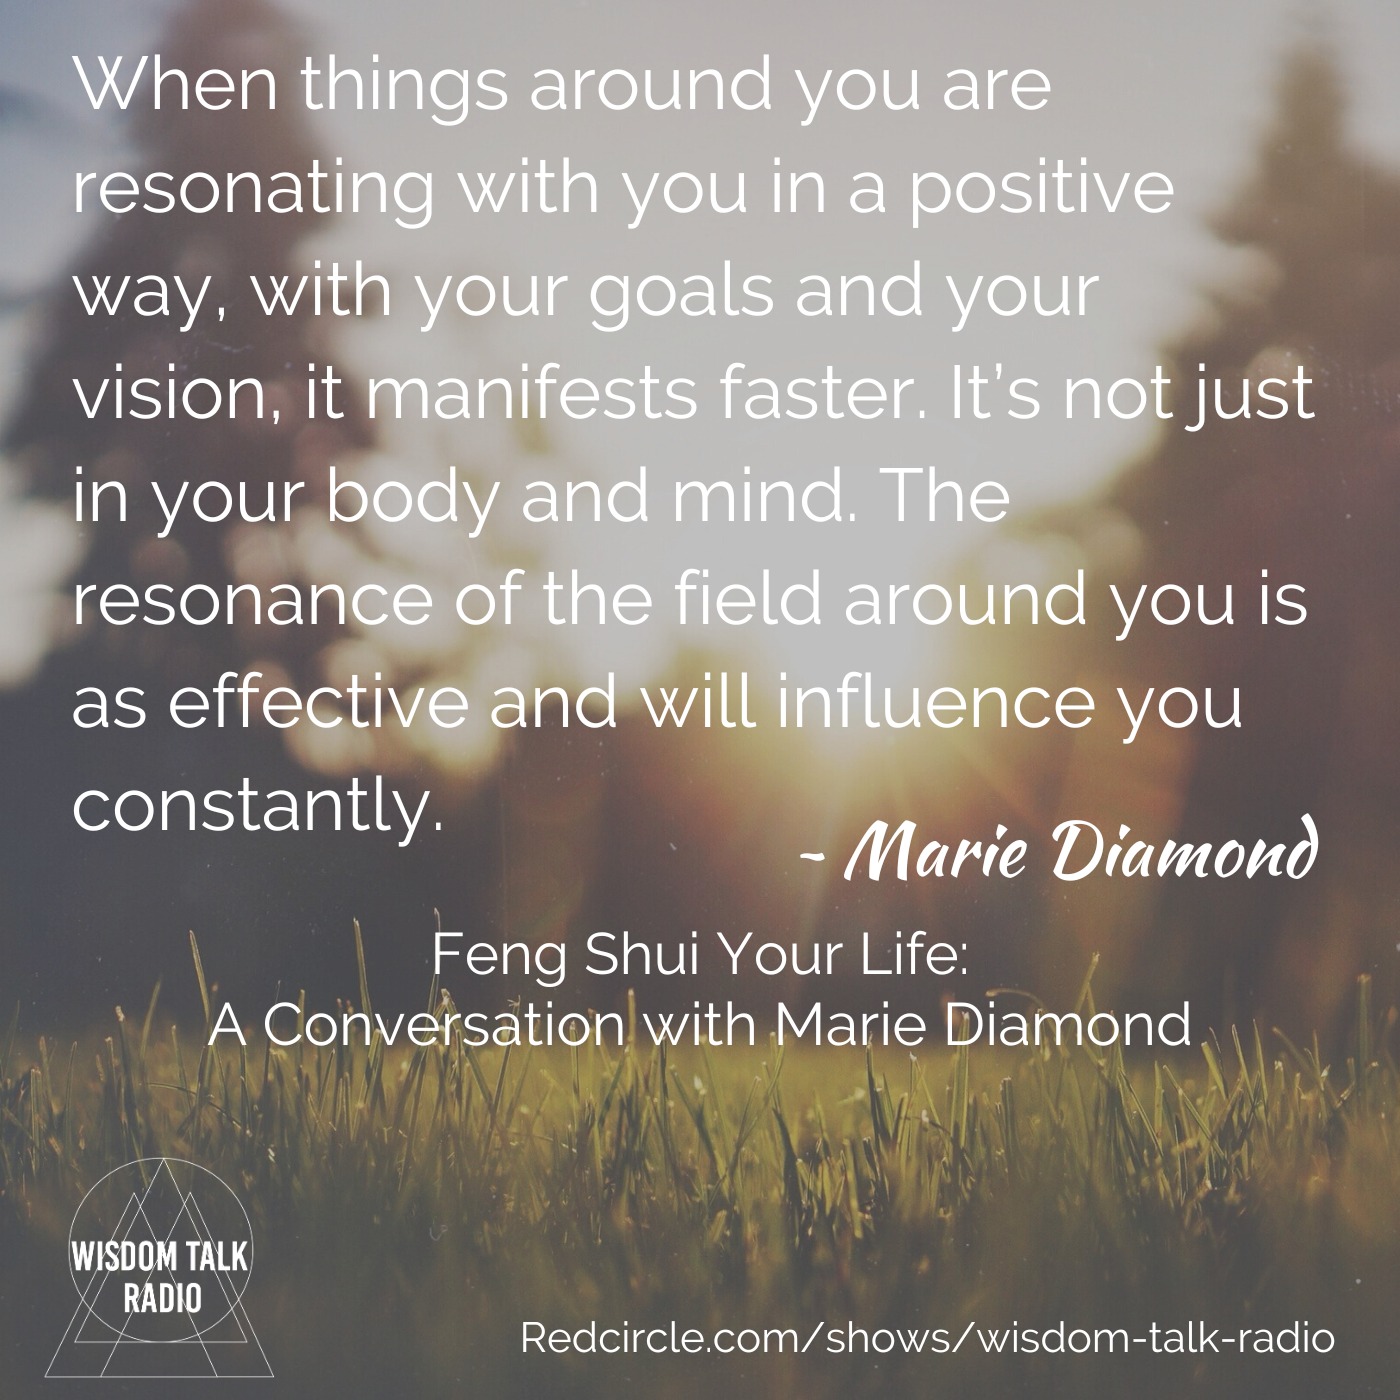 Feng Shui Your Life: a Conversation with Marie Diamond